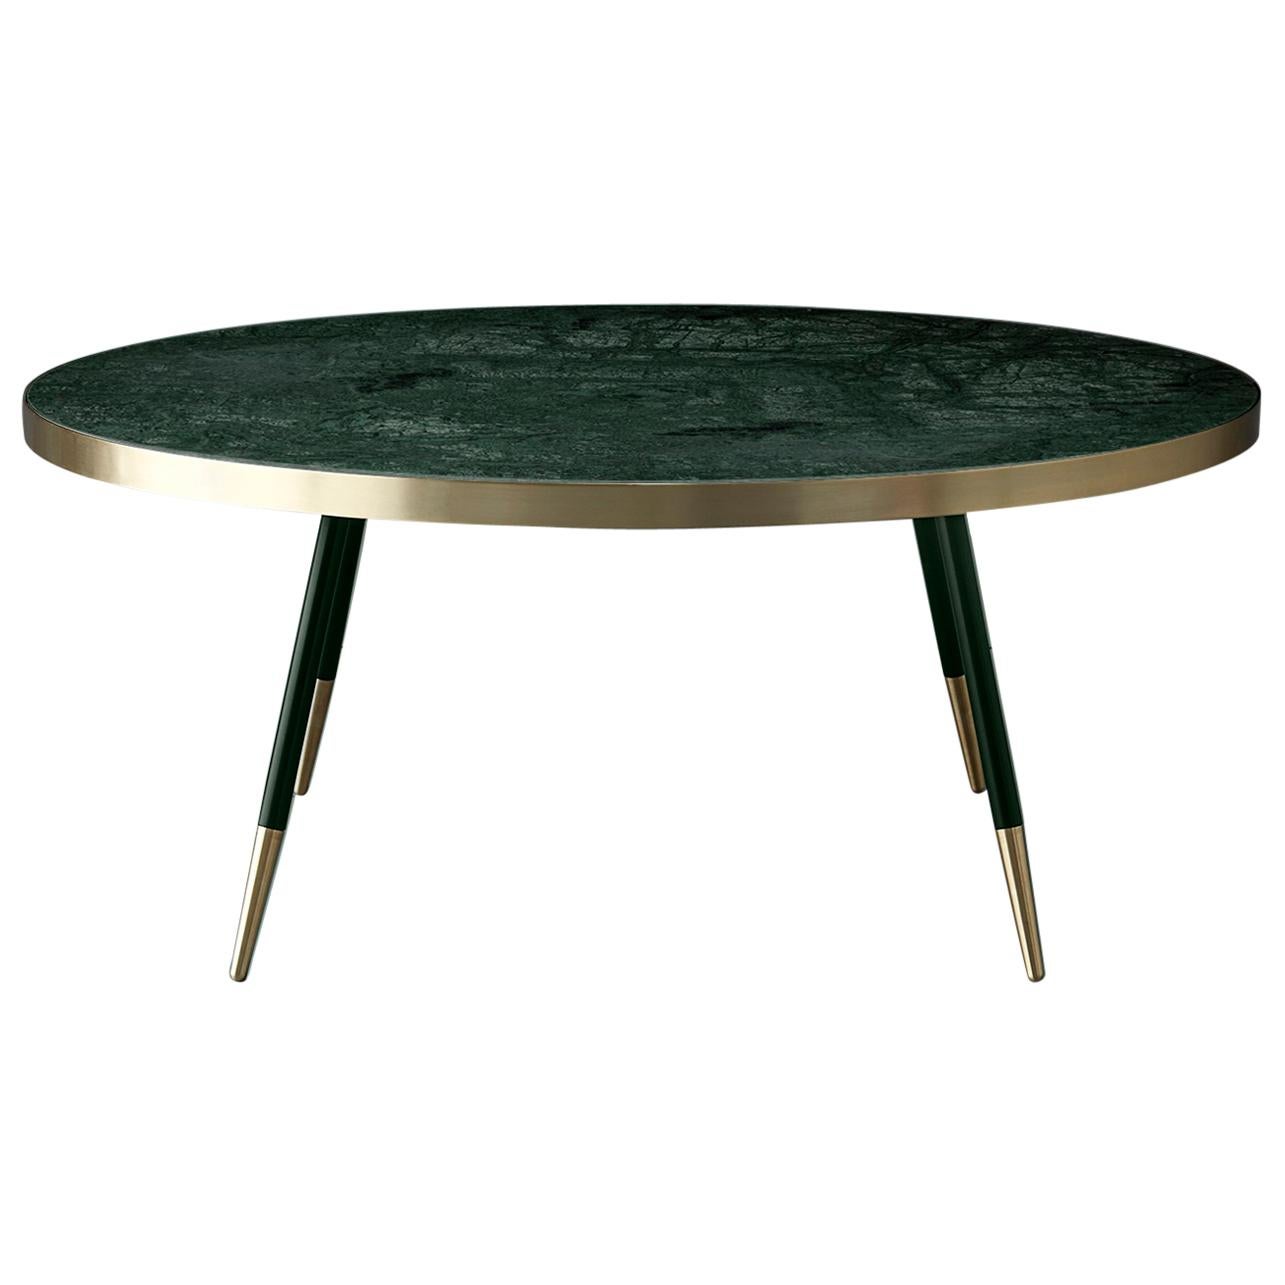 Bethan Gray Band Coffee Table single tone in Green with Black and Brass